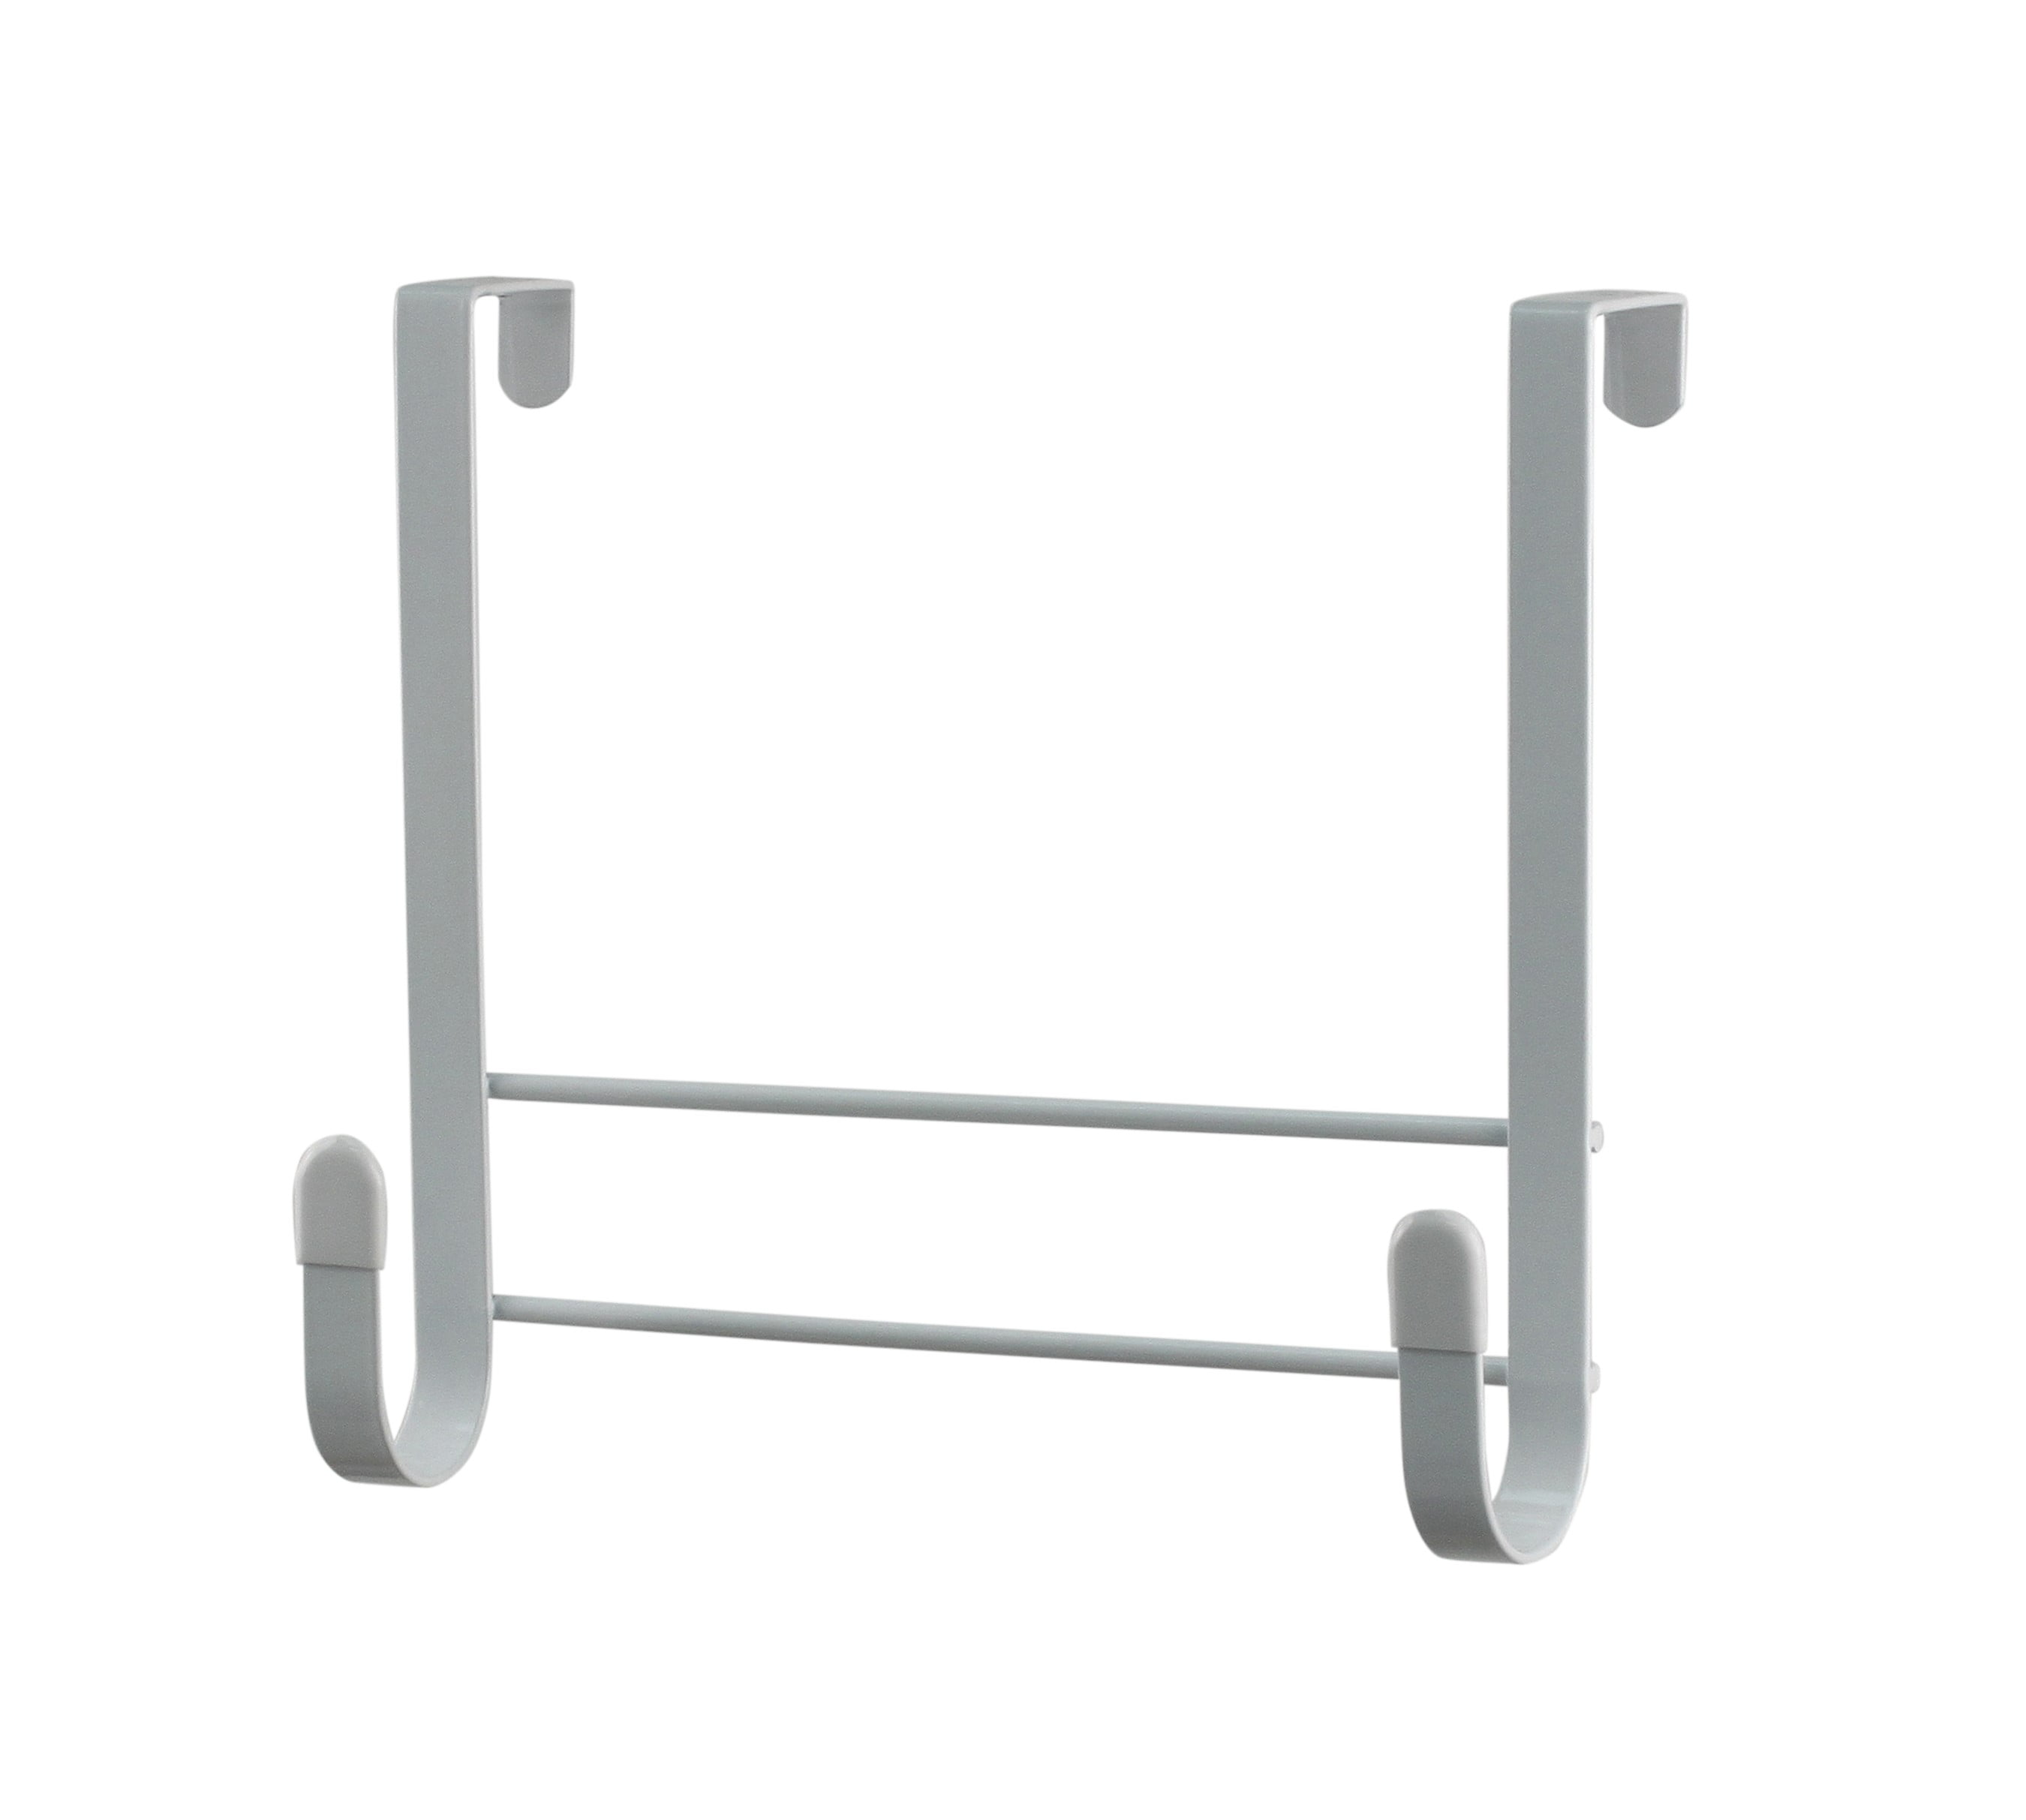 Details about   Laundry Iron Holder Board Ironing Hook Door Wall Mount Home Storage Rack Stand 